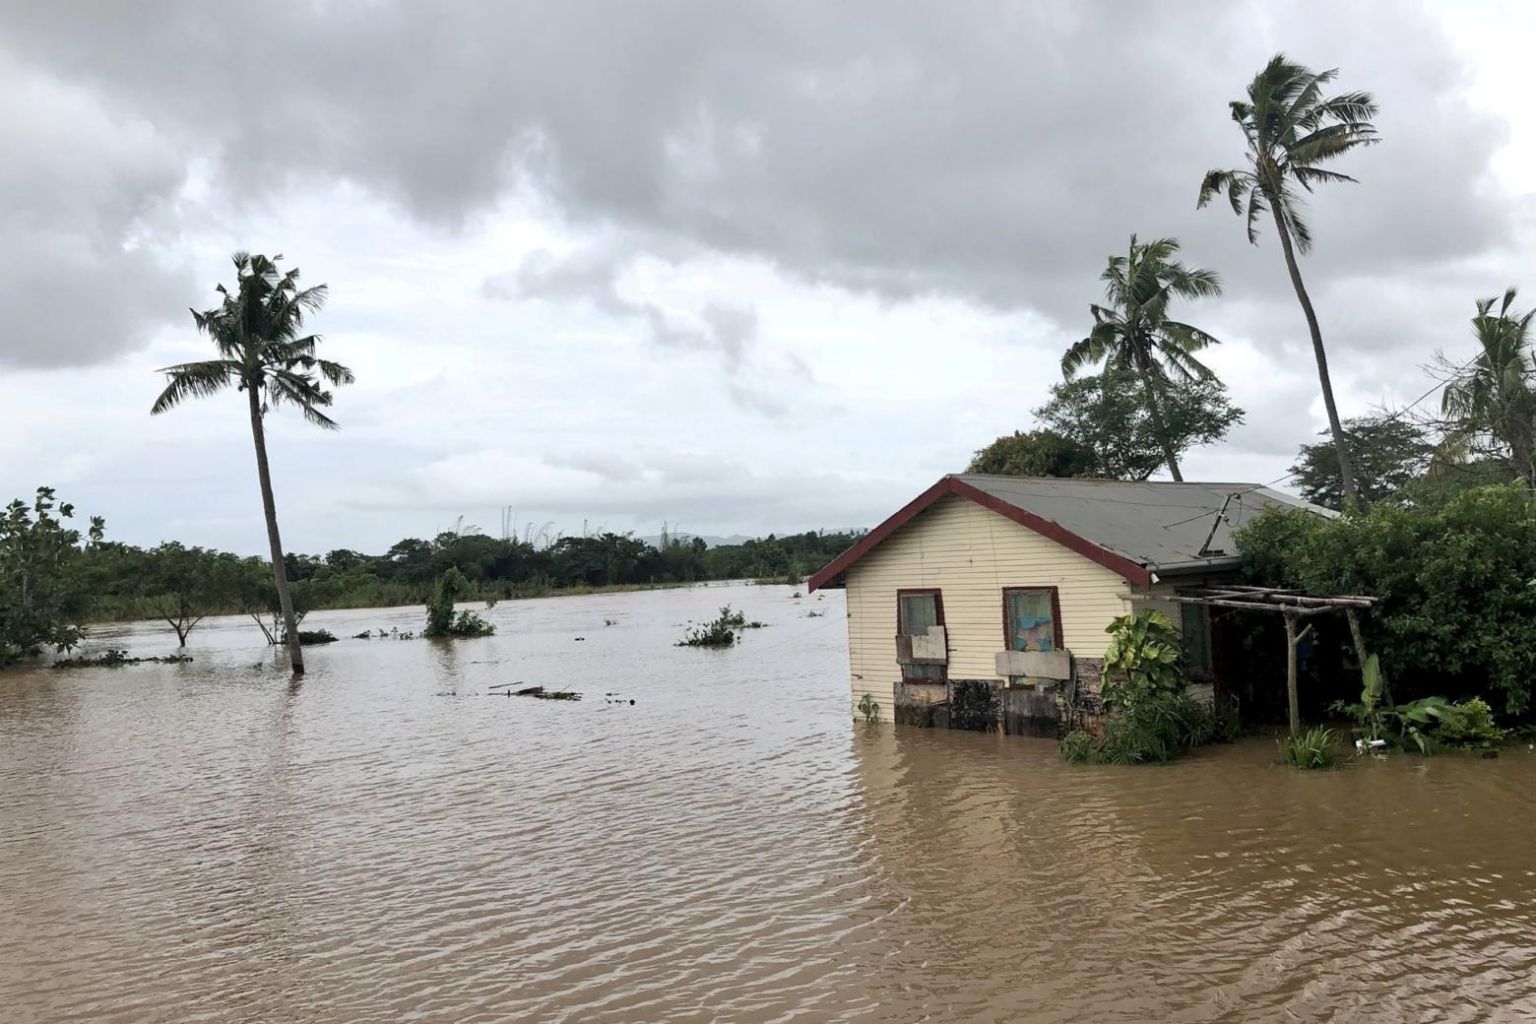 Fiji braces for second cyclone in just over a week